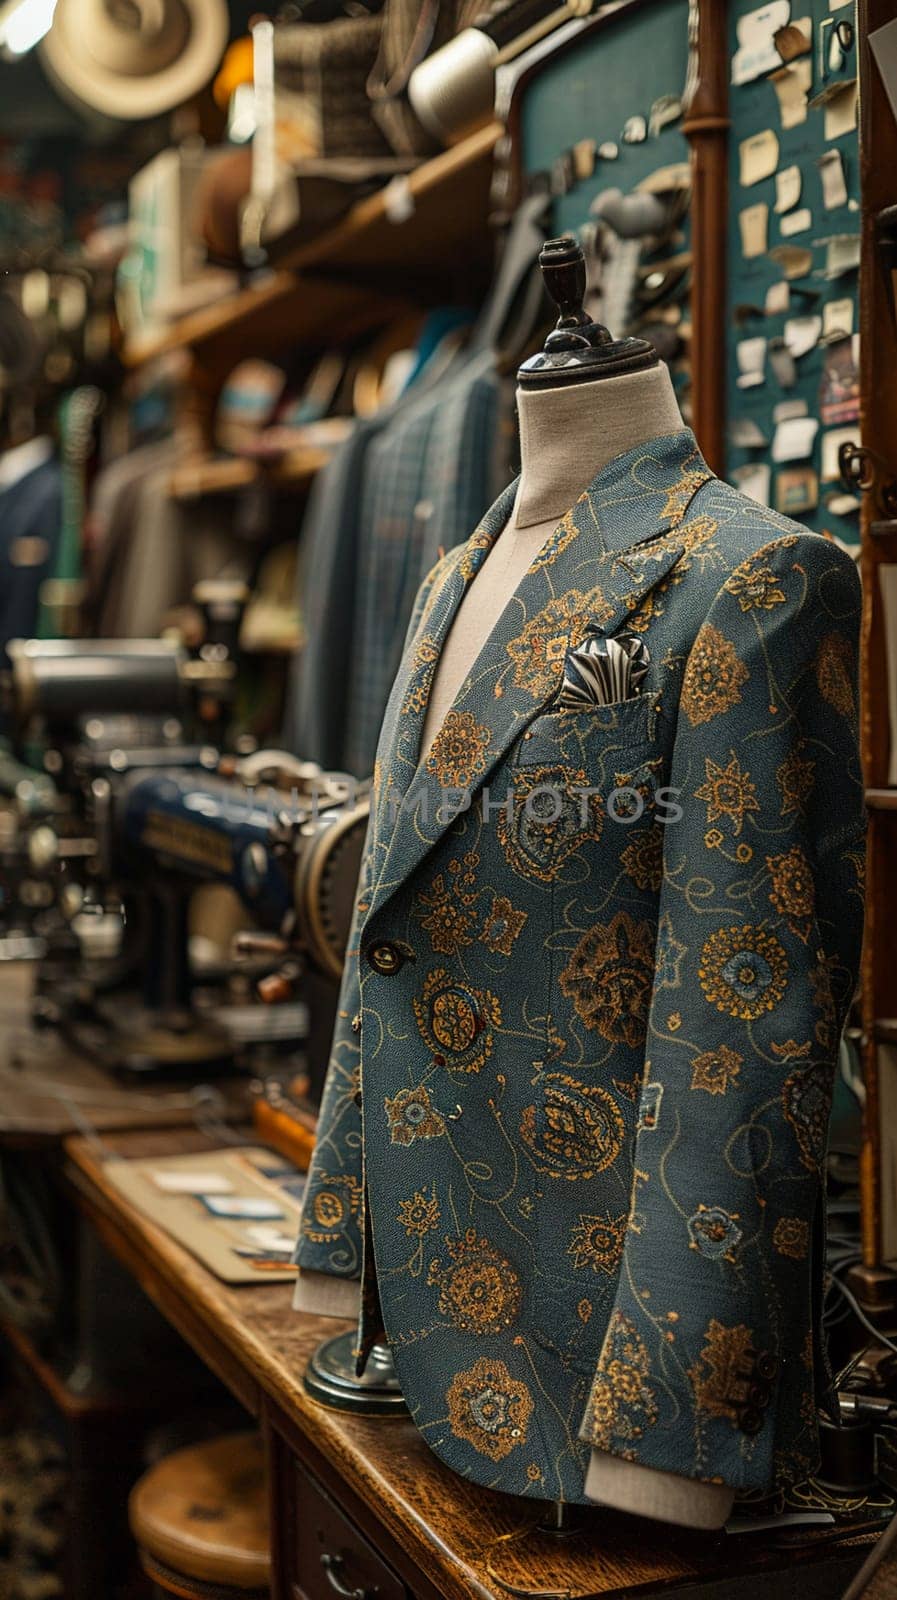 Tailored Suits Craft Professional Image in Business of Custom Fashion, Sewing machines and fabric swatches measure out a story of elegance and fit in the tailoring business.